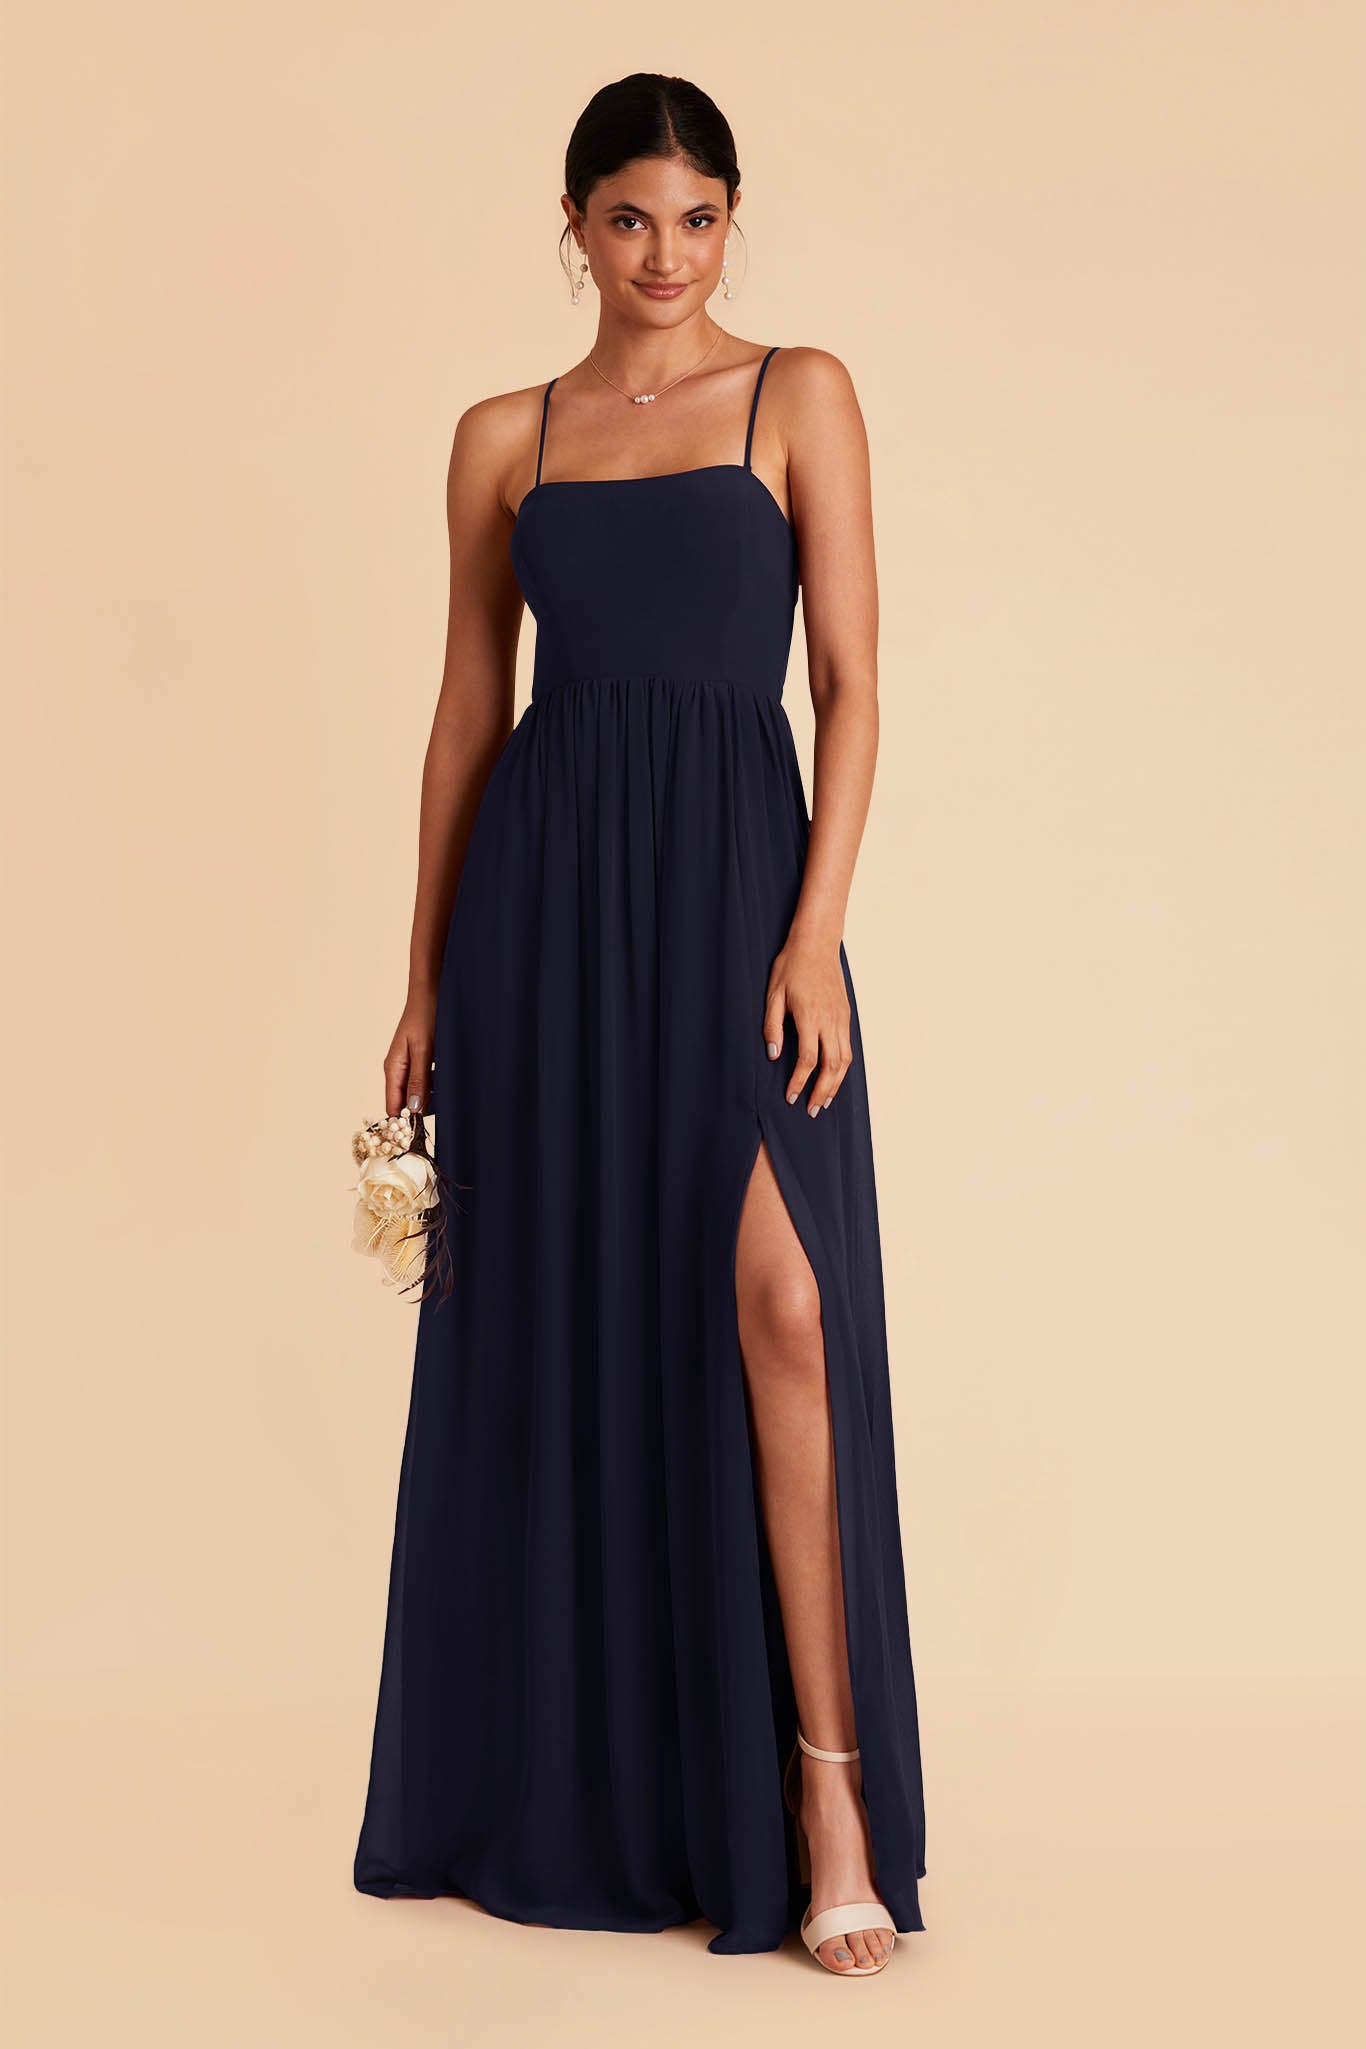 Navy August Convertible Dress by Birdy Grey